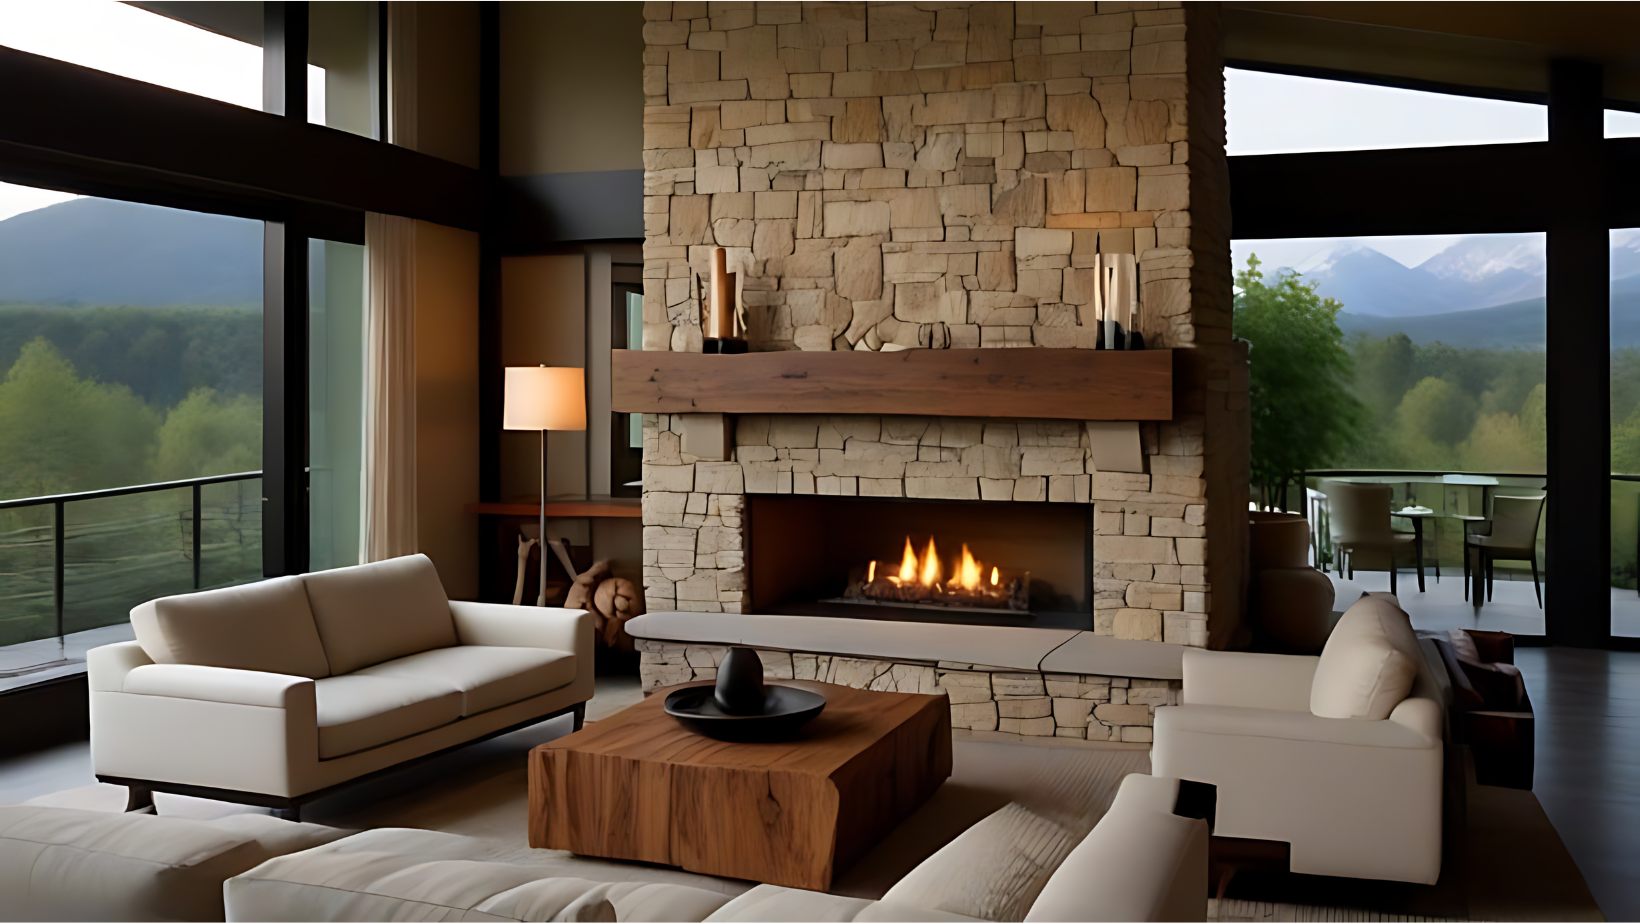 A living room with a fireplace and mountains in the background